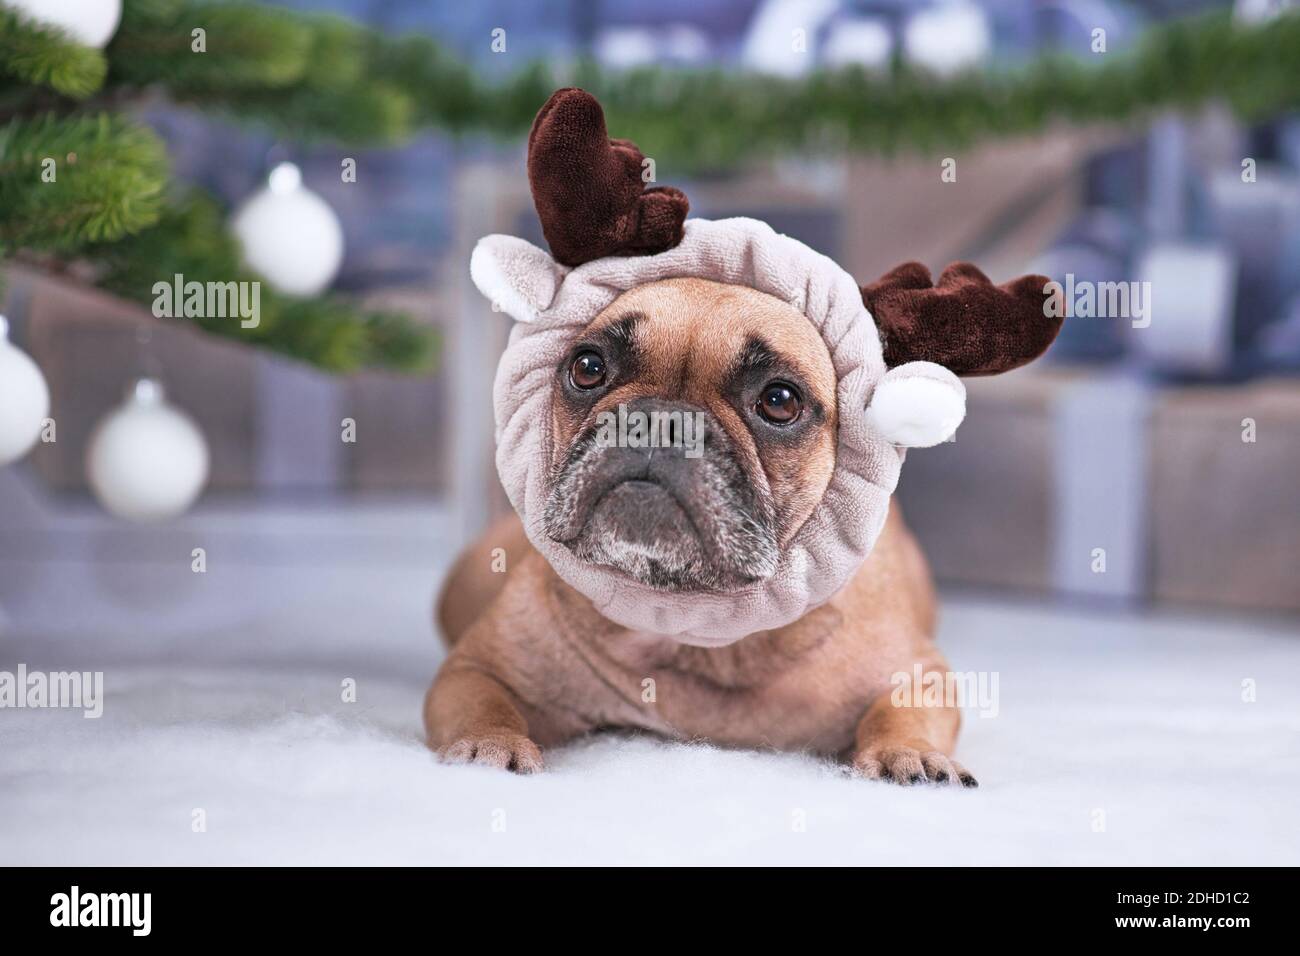 Cute French Bulldog dog wearing reindeer antler headband lying down on white blanket in fornt of Christmas tree with gifts in blurry background Stock Photo